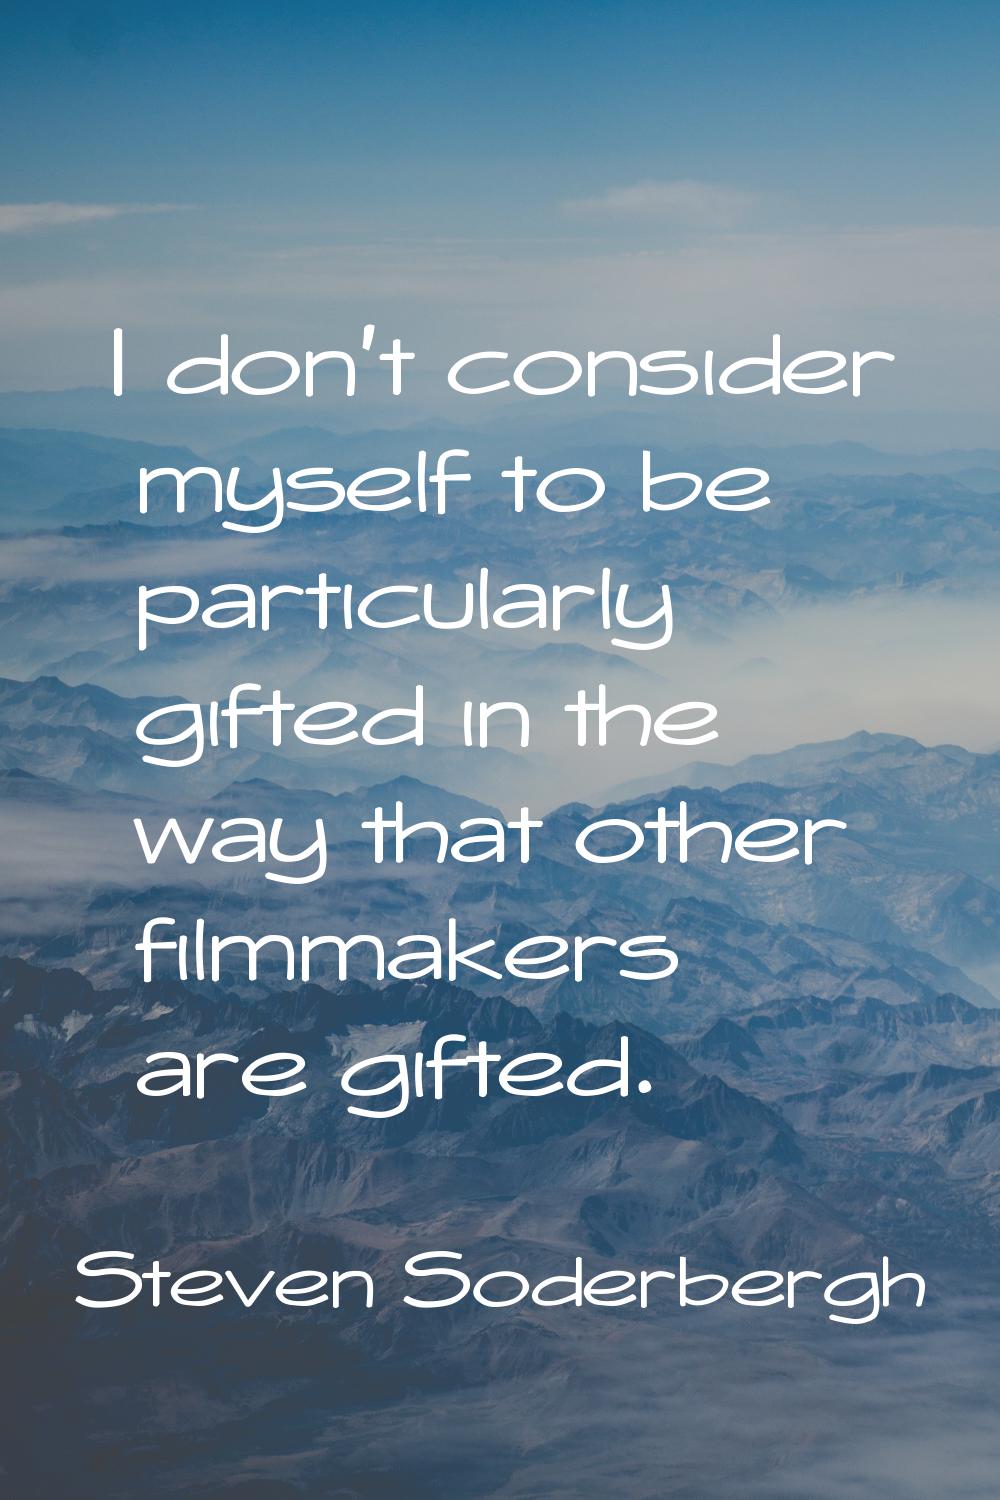 I don't consider myself to be particularly gifted in the way that other filmmakers are gifted.